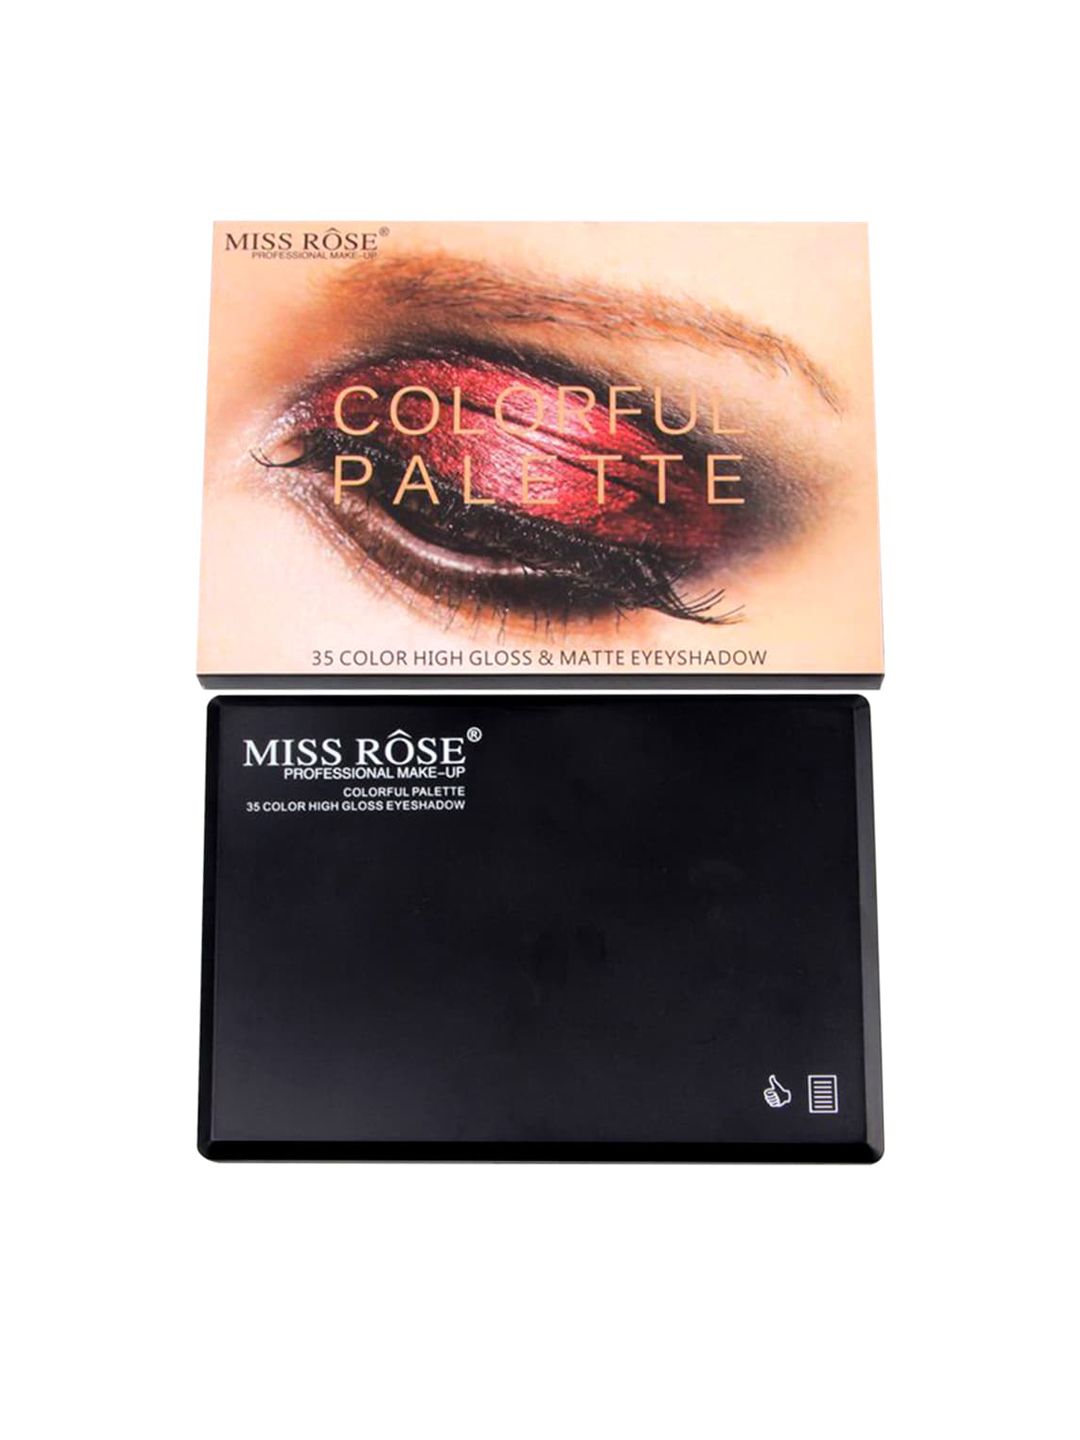 MISS ROSE High Gloss & Matte Colorful Eyeshadow Palette Price in India